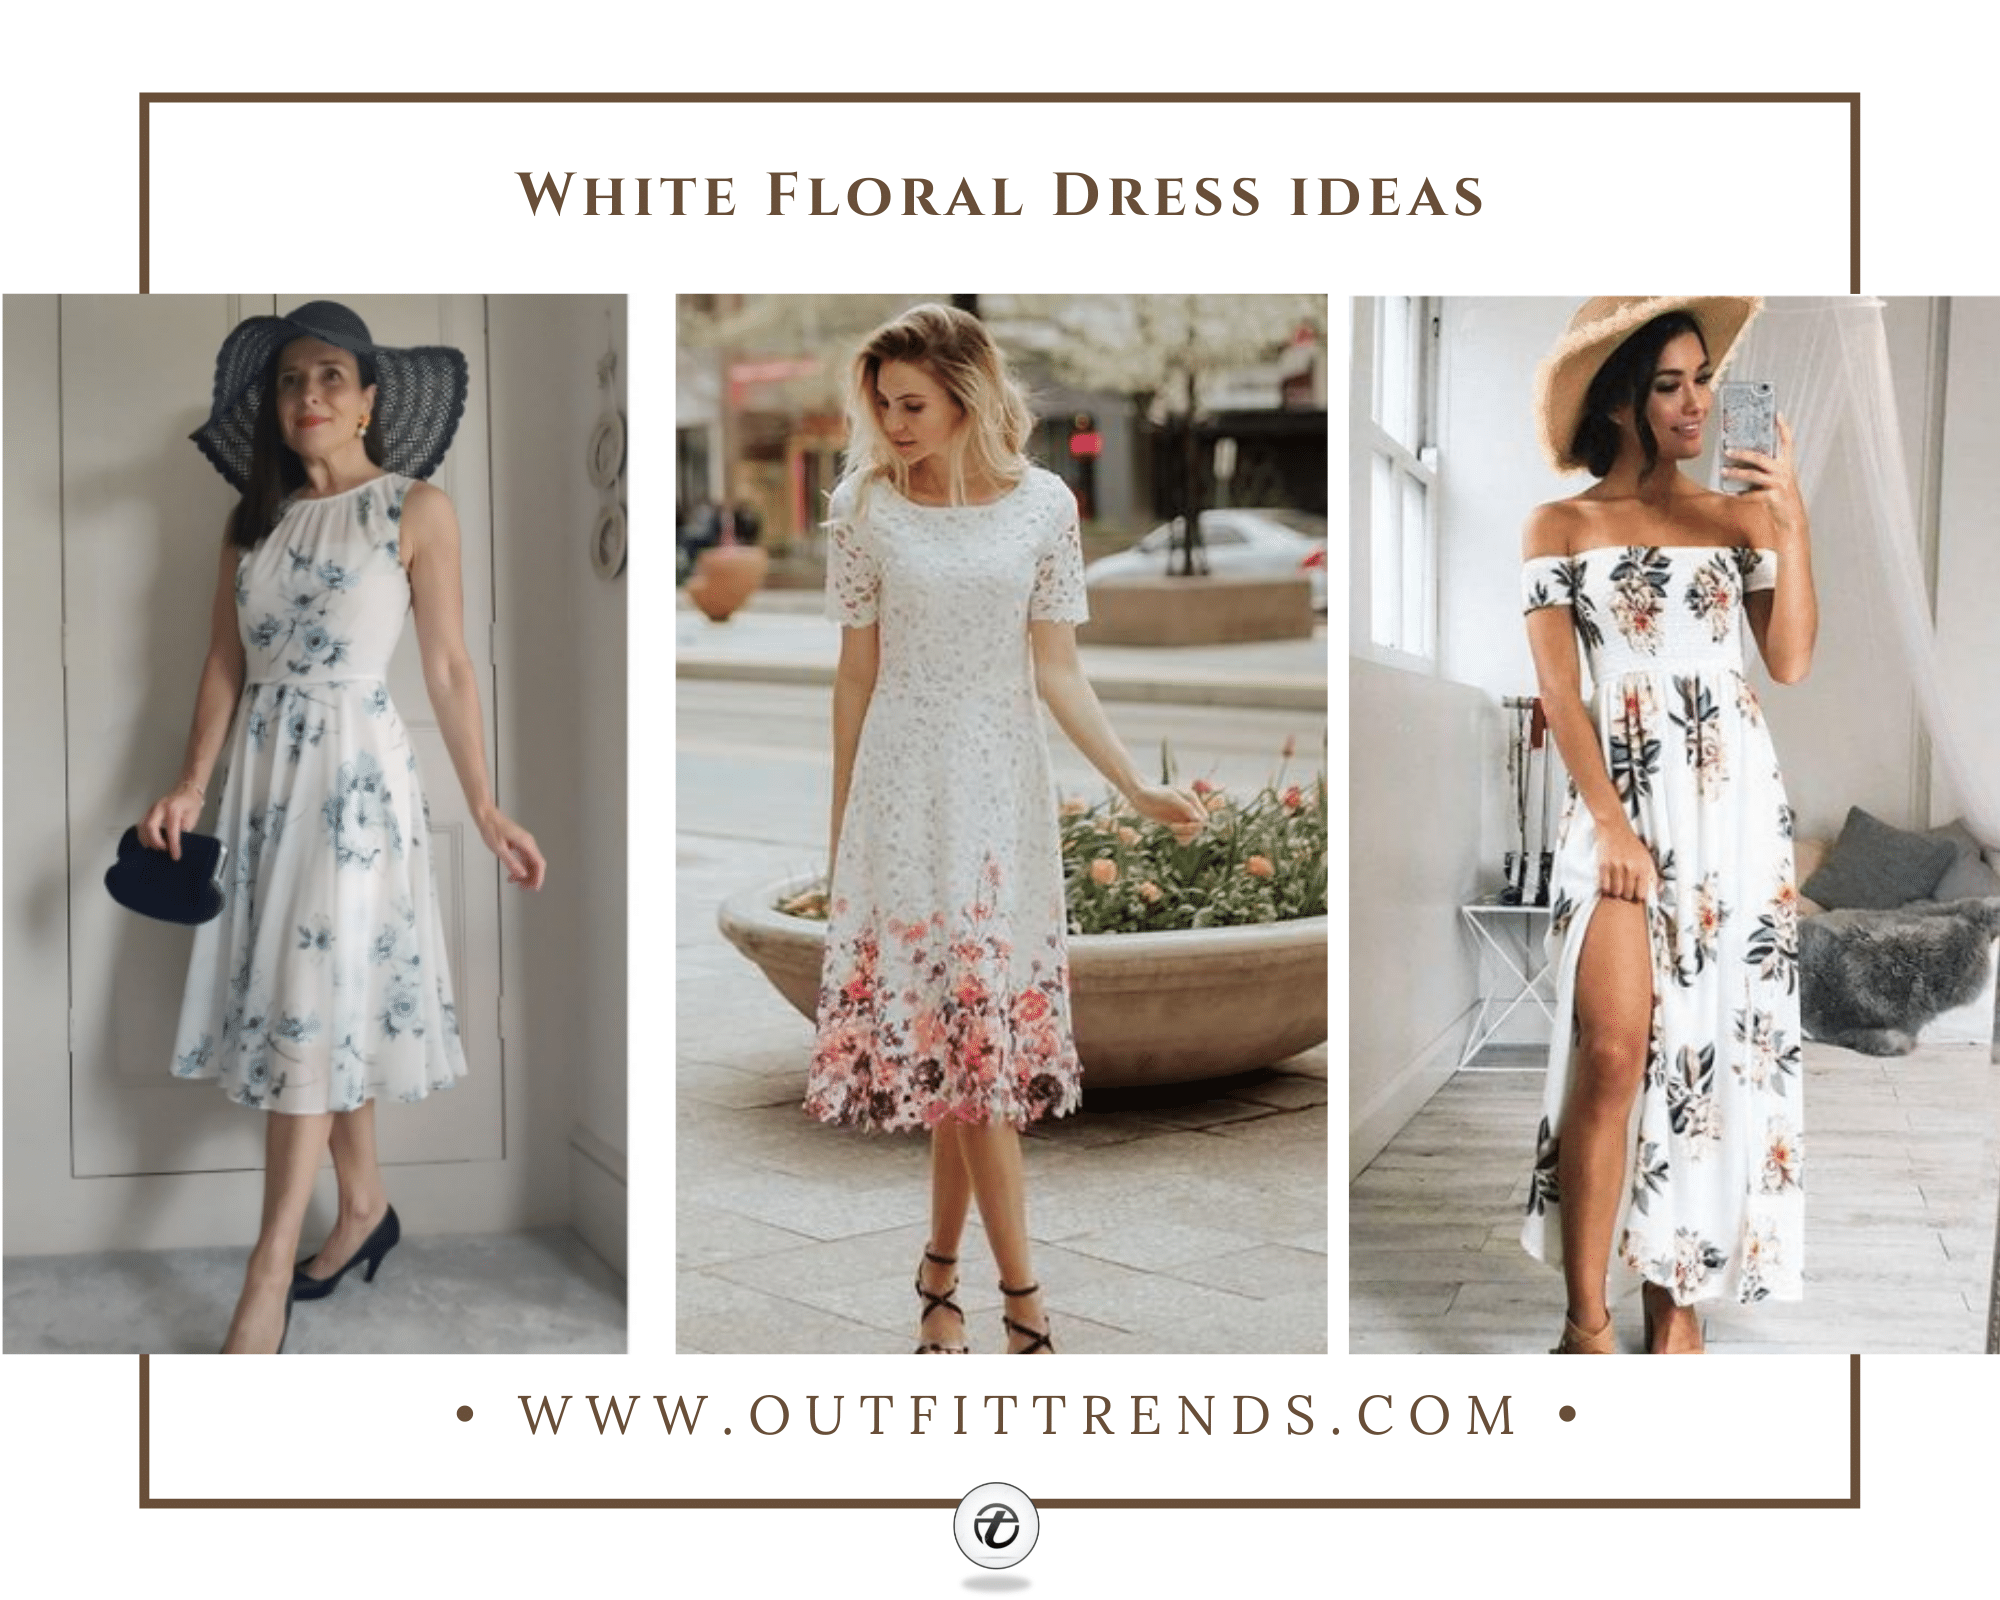 How to Wear White Floral Dresses in ...